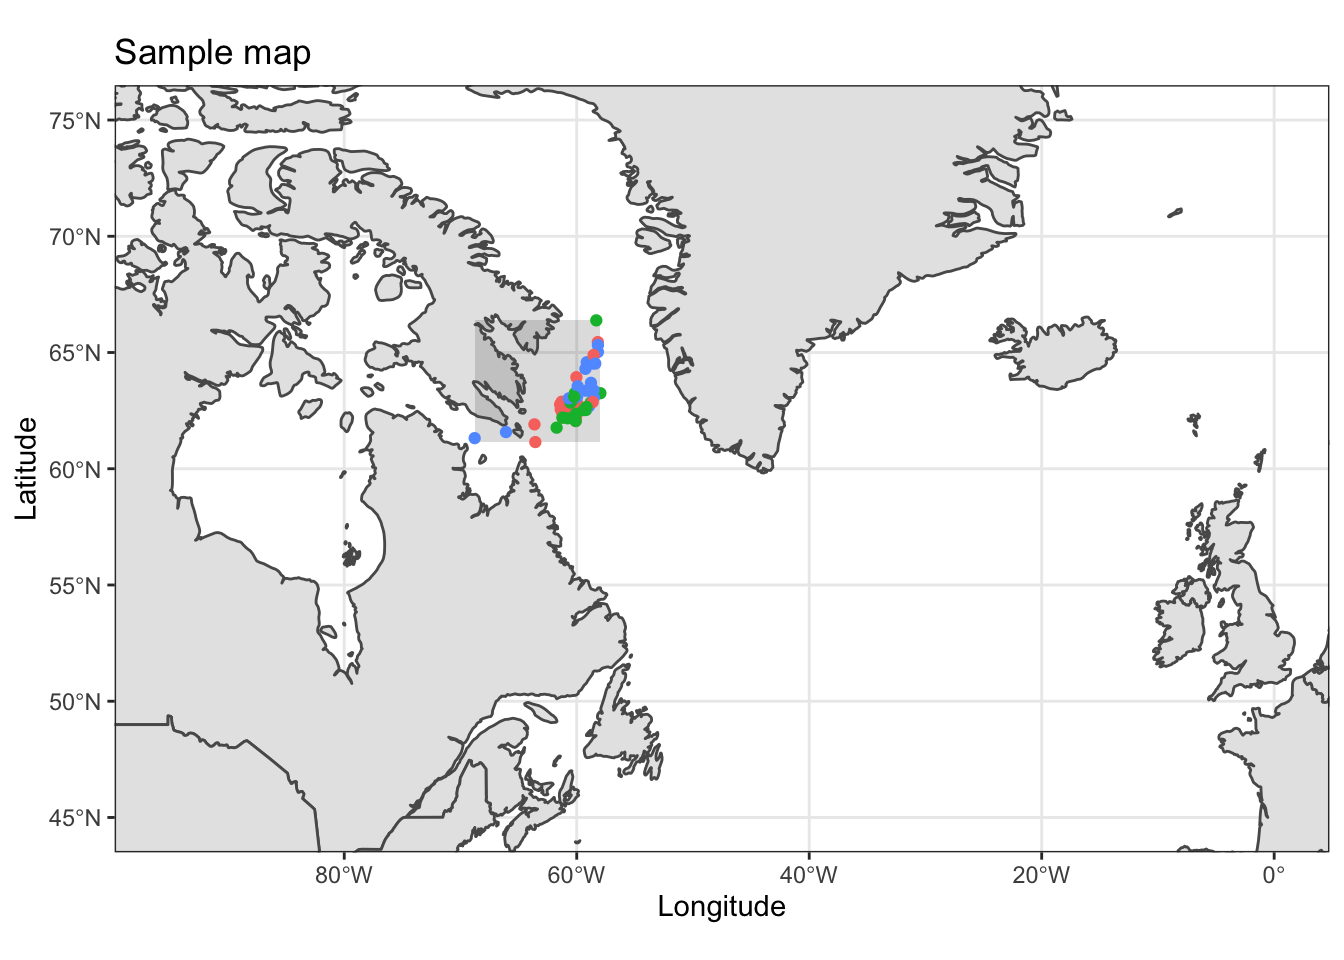 Geographic placement of the sample site on the Northern hemisphere, between Canada and Greenland. Dots indicate individual samples.